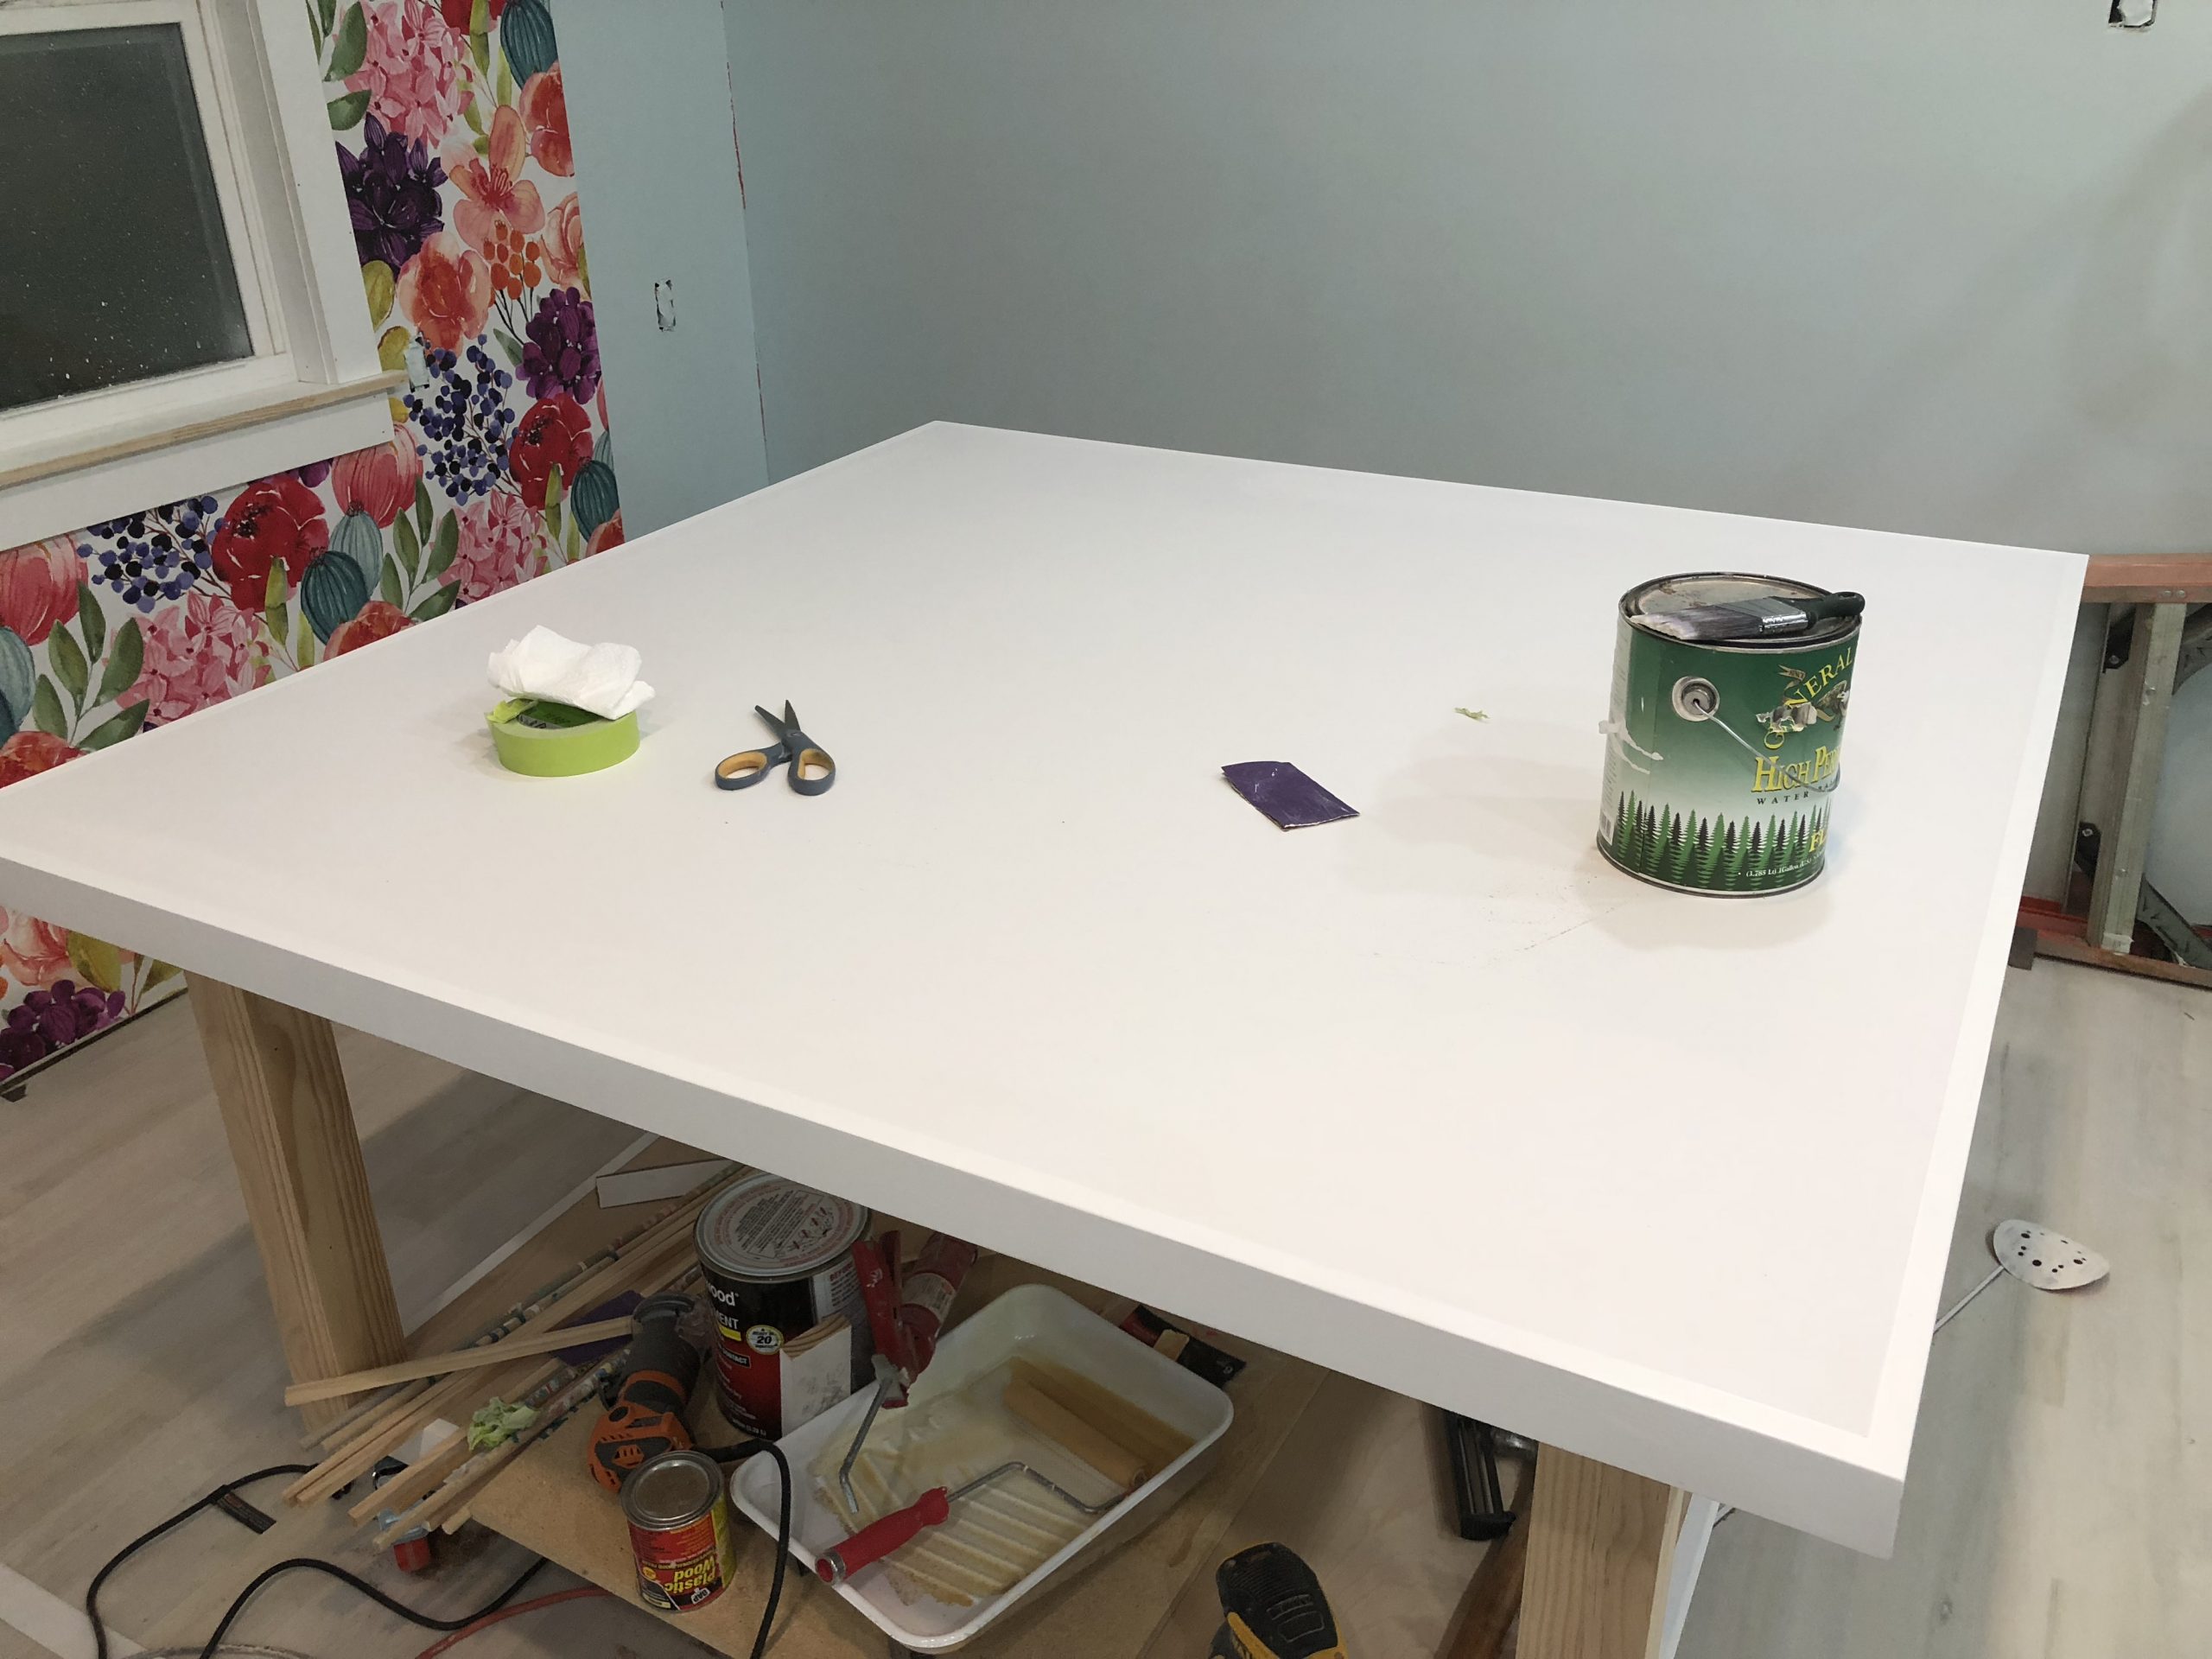 Laminate Table Top Success (Mostly) & A Change Of Heart